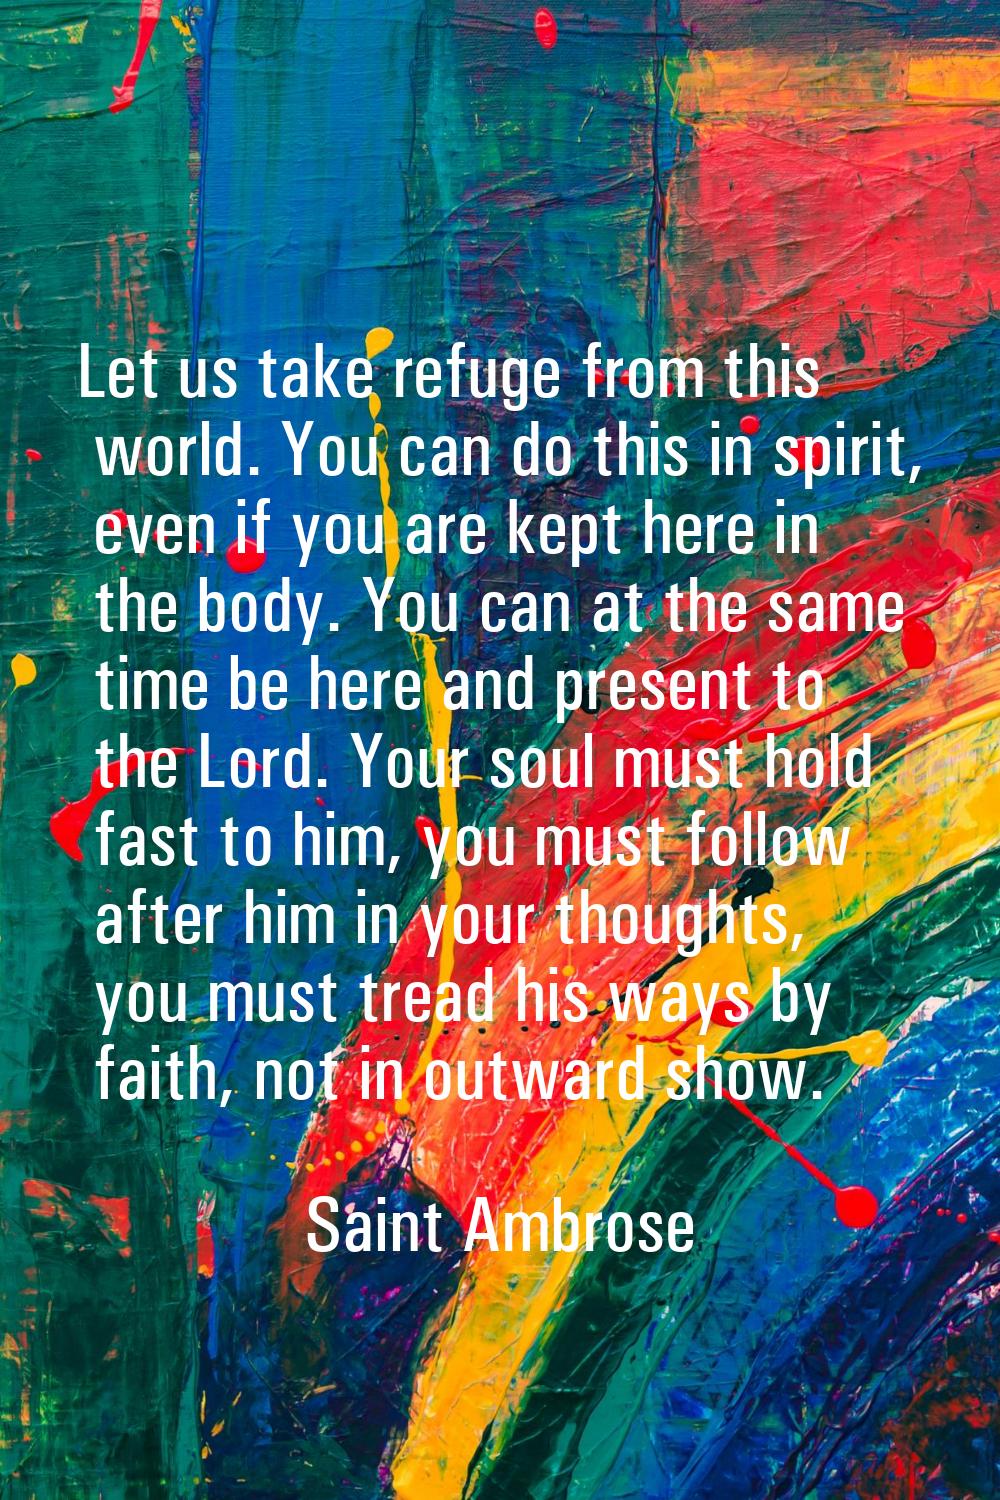 Let us take refuge from this world. You can do this in spirit, even if you are kept here in the bod